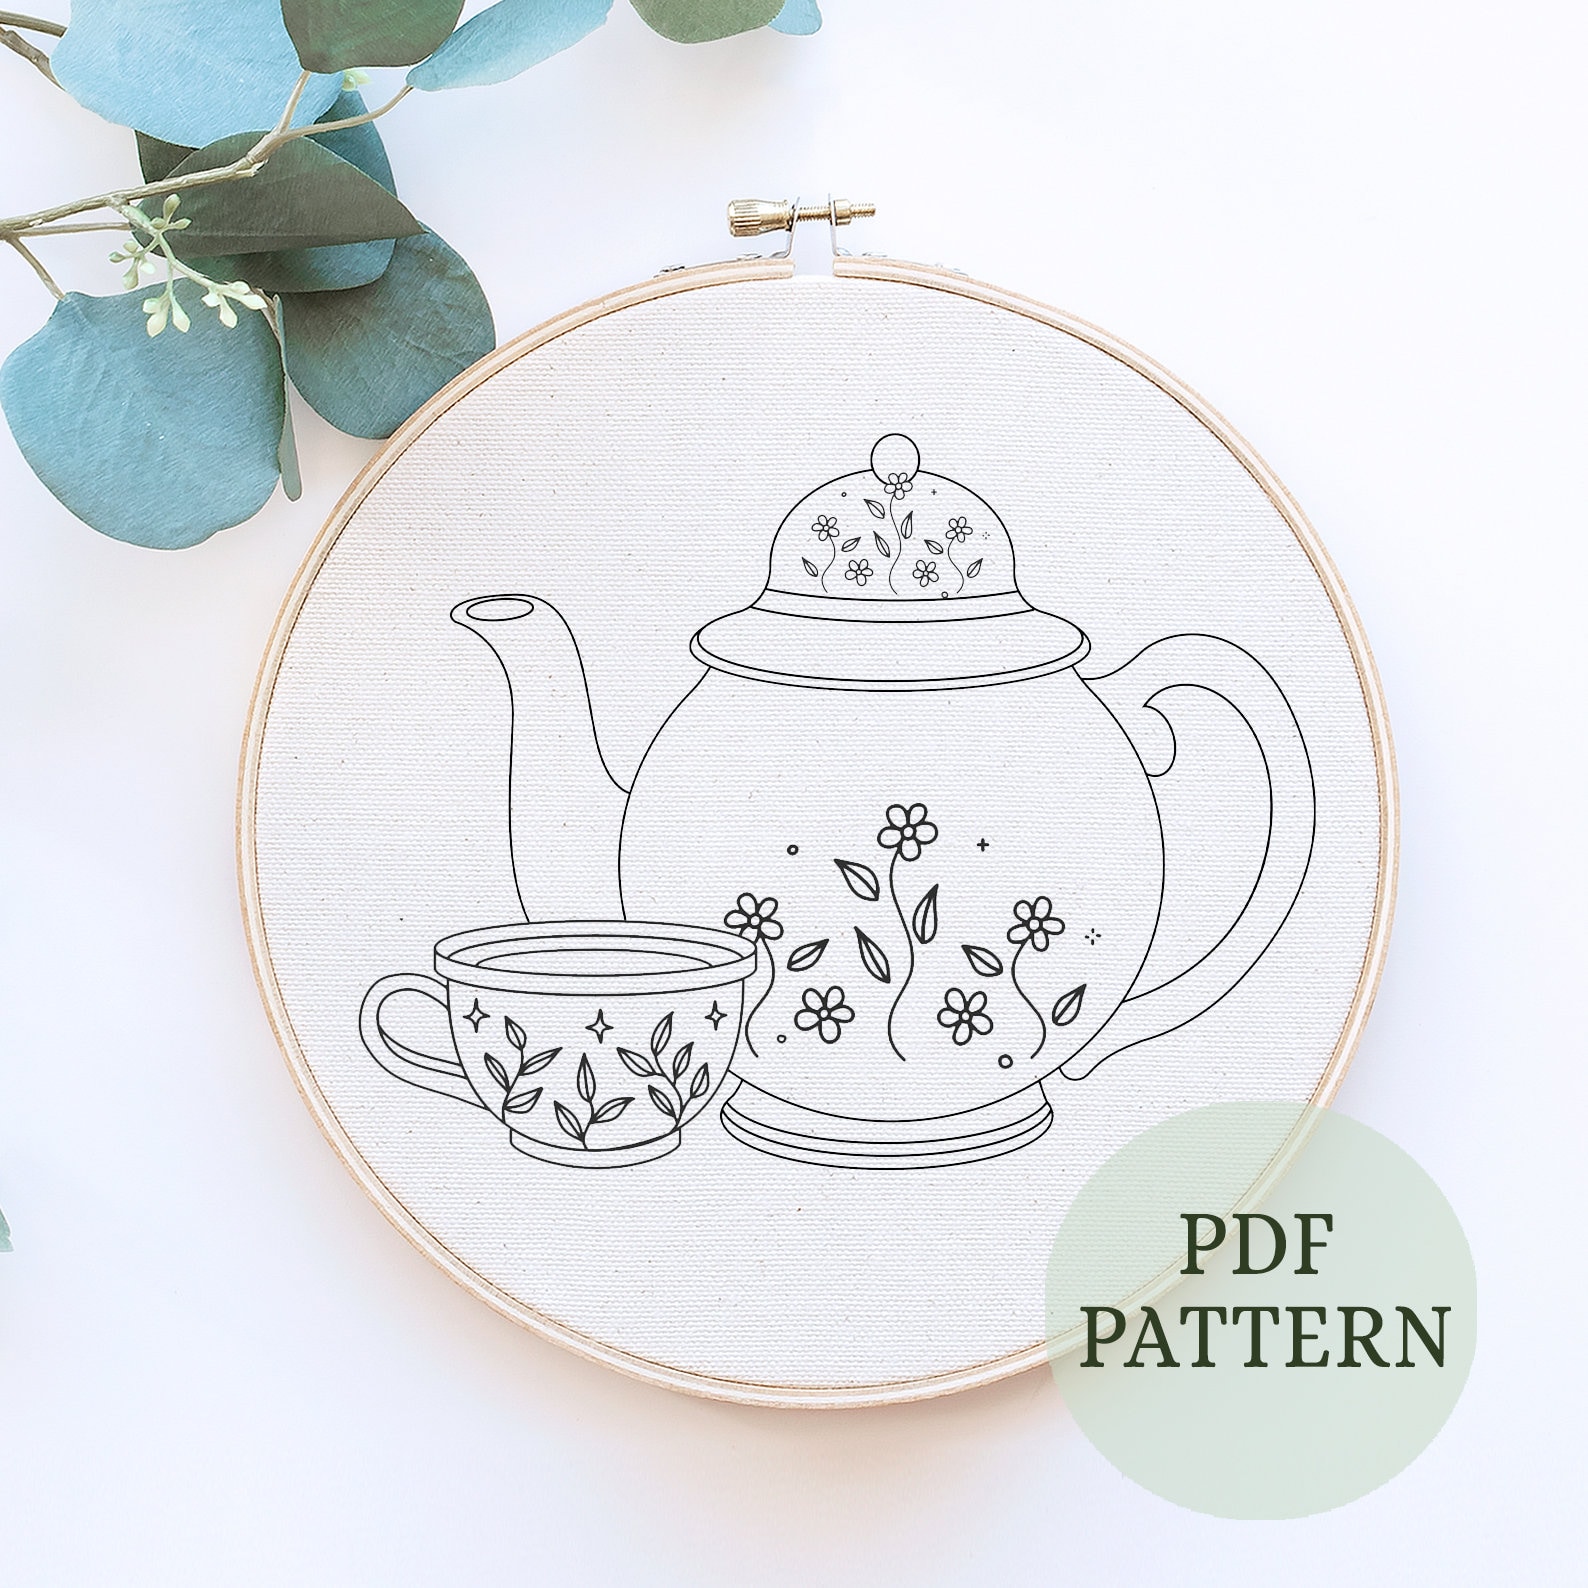 Pots and Pans  Vintage embroidery, Embroidery patterns vintage